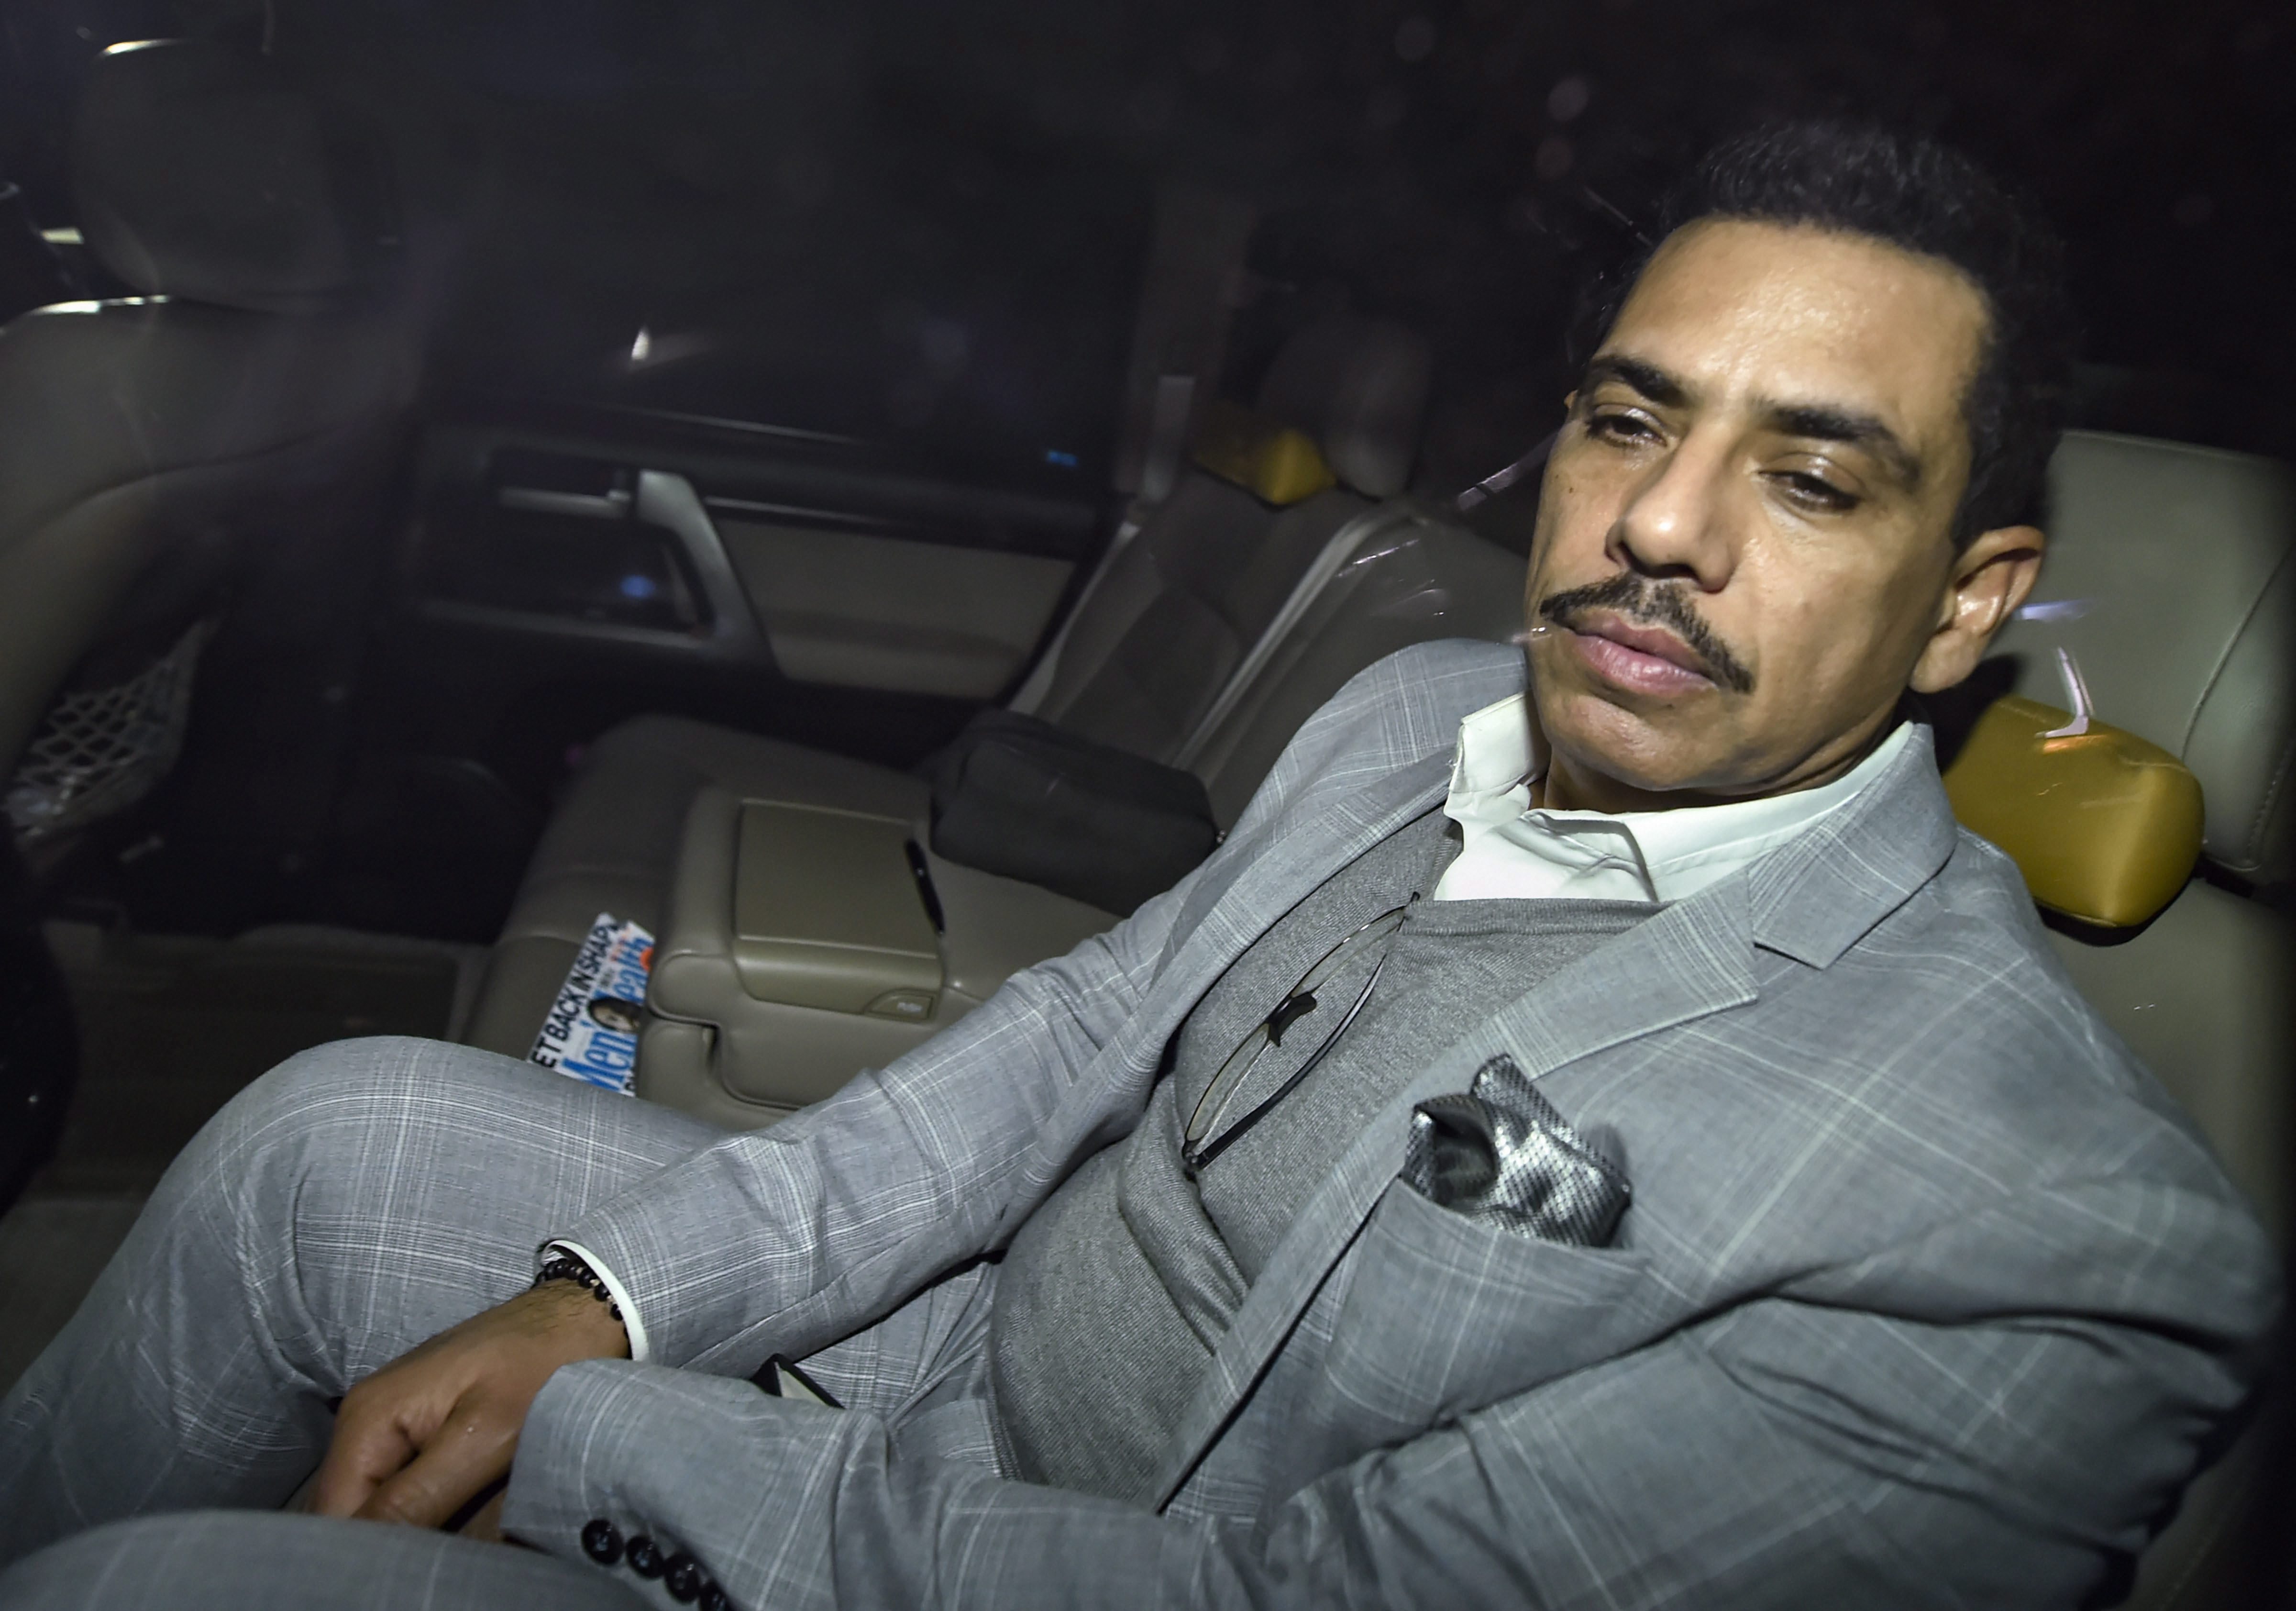 Robert Vadra leaves after appearing before the Enforcement Directorate in New Delhi on February 6, 2019.